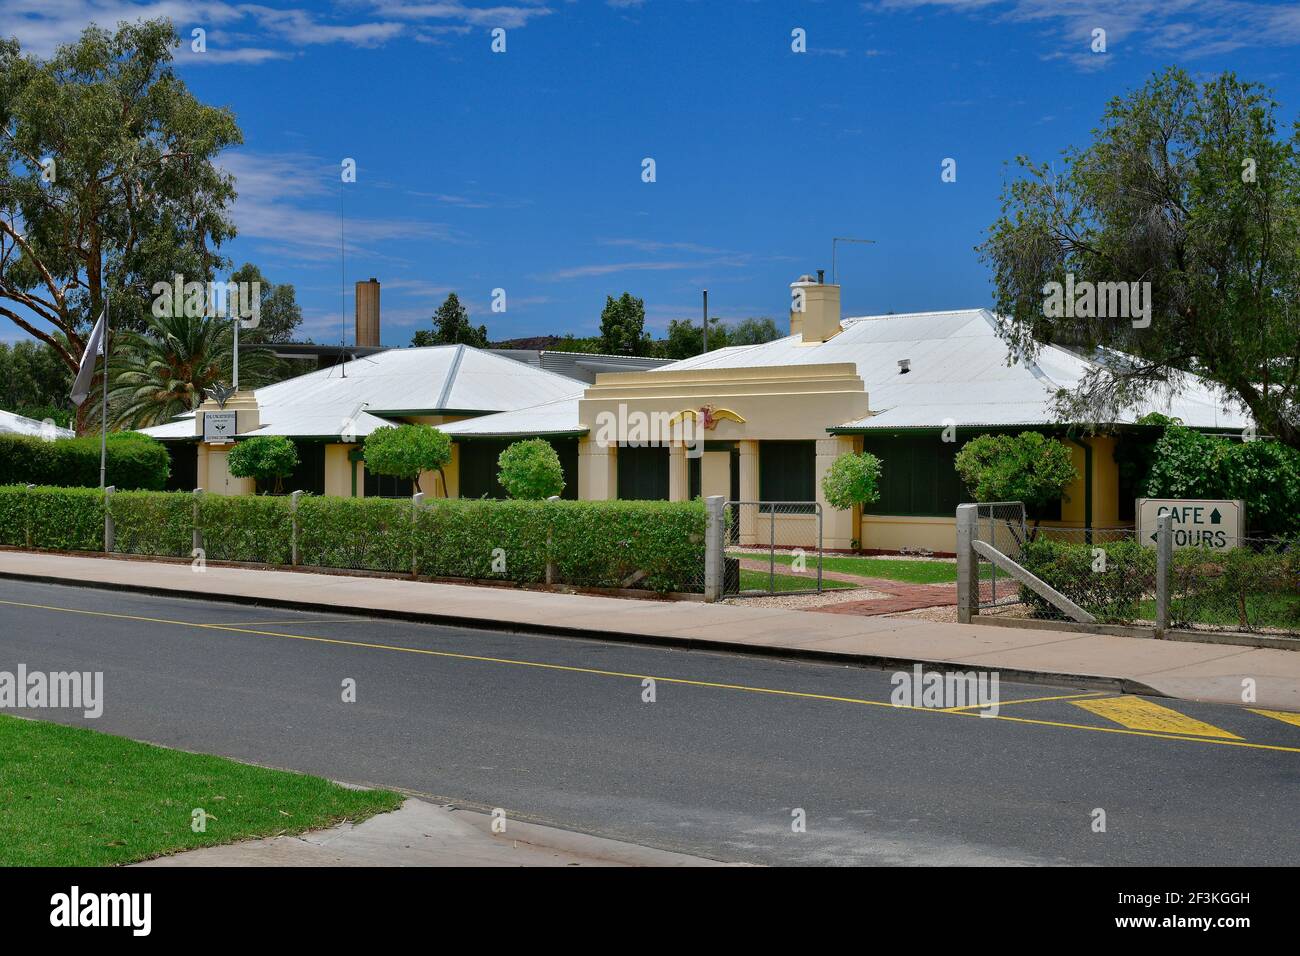 Alice Springs, NT, Australia - November 16, 2017: Office building from Royal Flying Doctor Service aka RFDS, a non profit aeromedical organisation foun Stock Photo